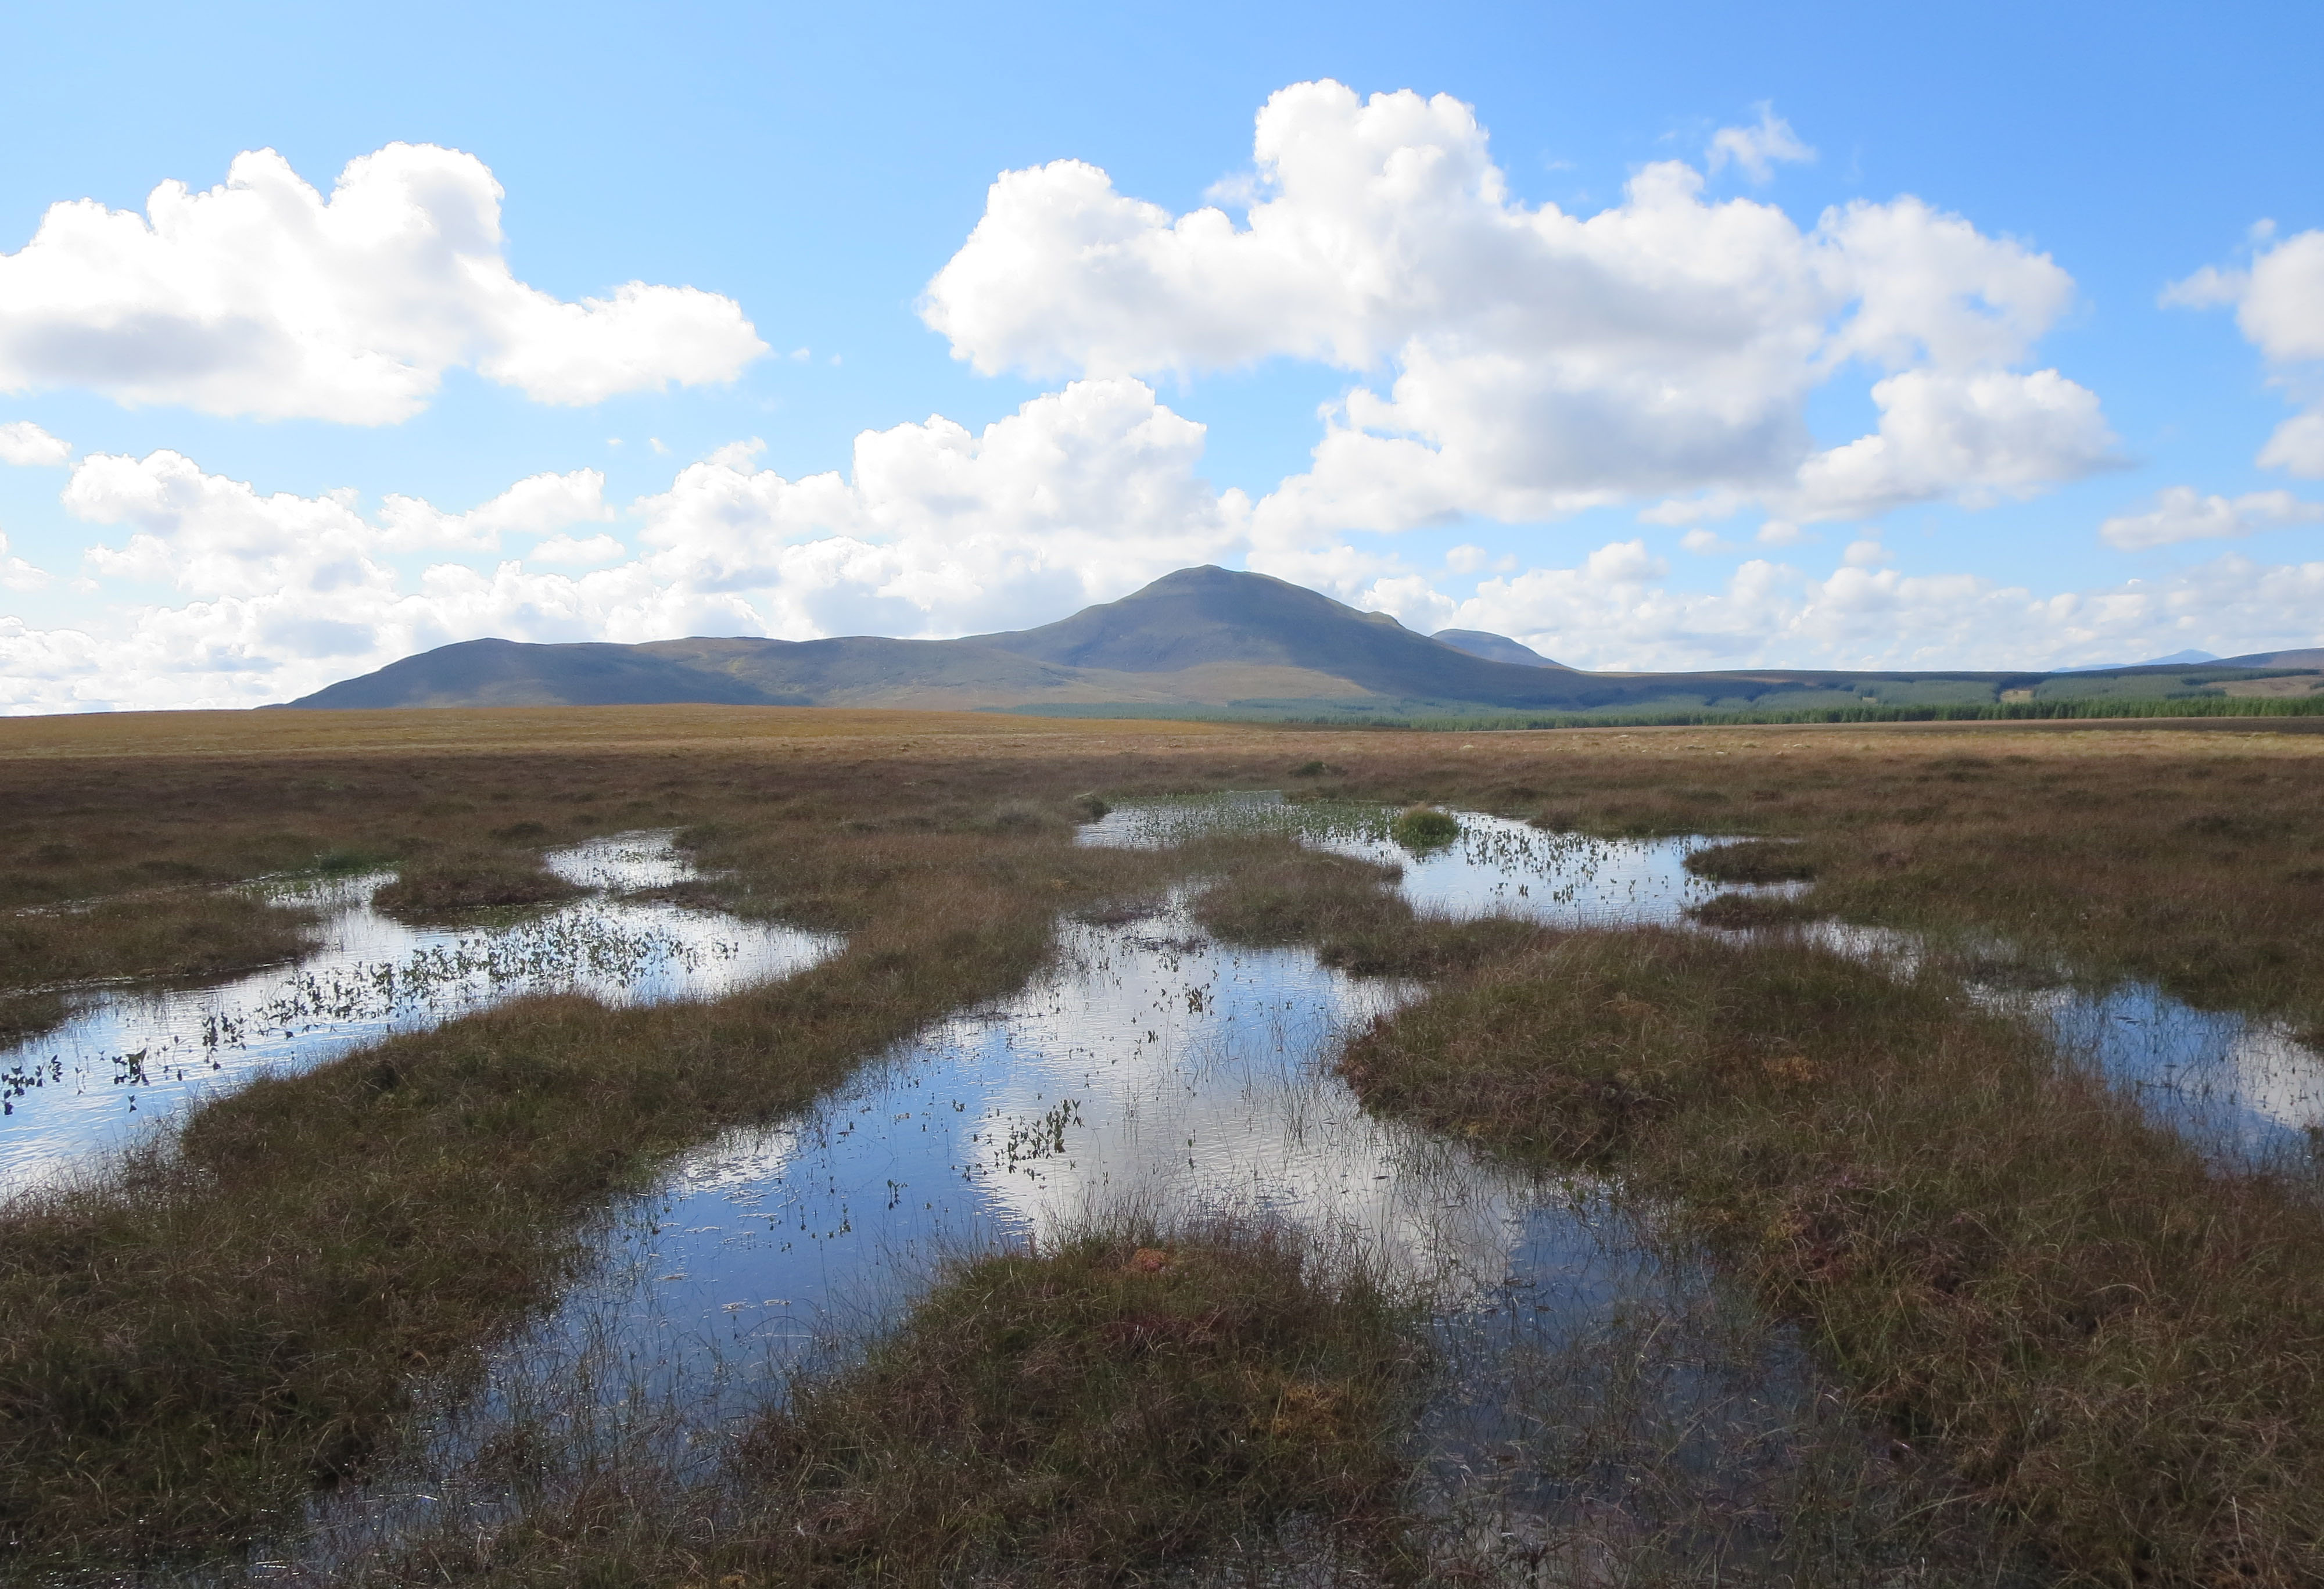 University awarded £986,000 grant to expand peatland research